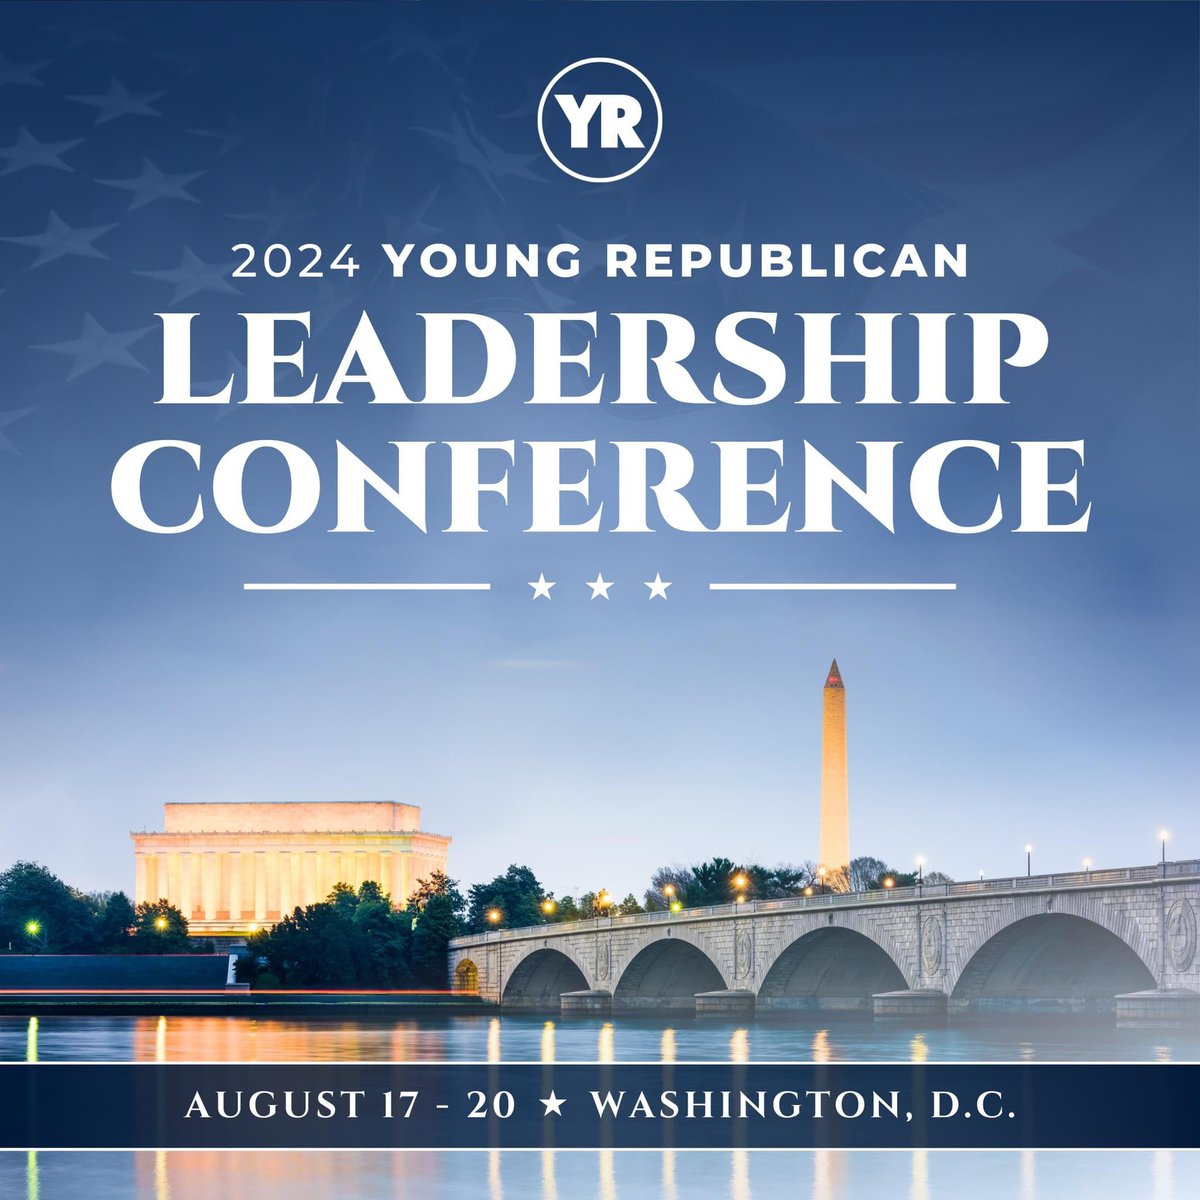 🏛 Join us in Washington DC for our biennial Young Republican Leadership Conference! 🗽 Pack your suit and your notebook August 17 - 20. 🕶️ All YRs are welcome - you can register at yrlc2024.eventbrite.com! 🇺🇸 #yrlc2024 #YoungRepublicans #YRsLead